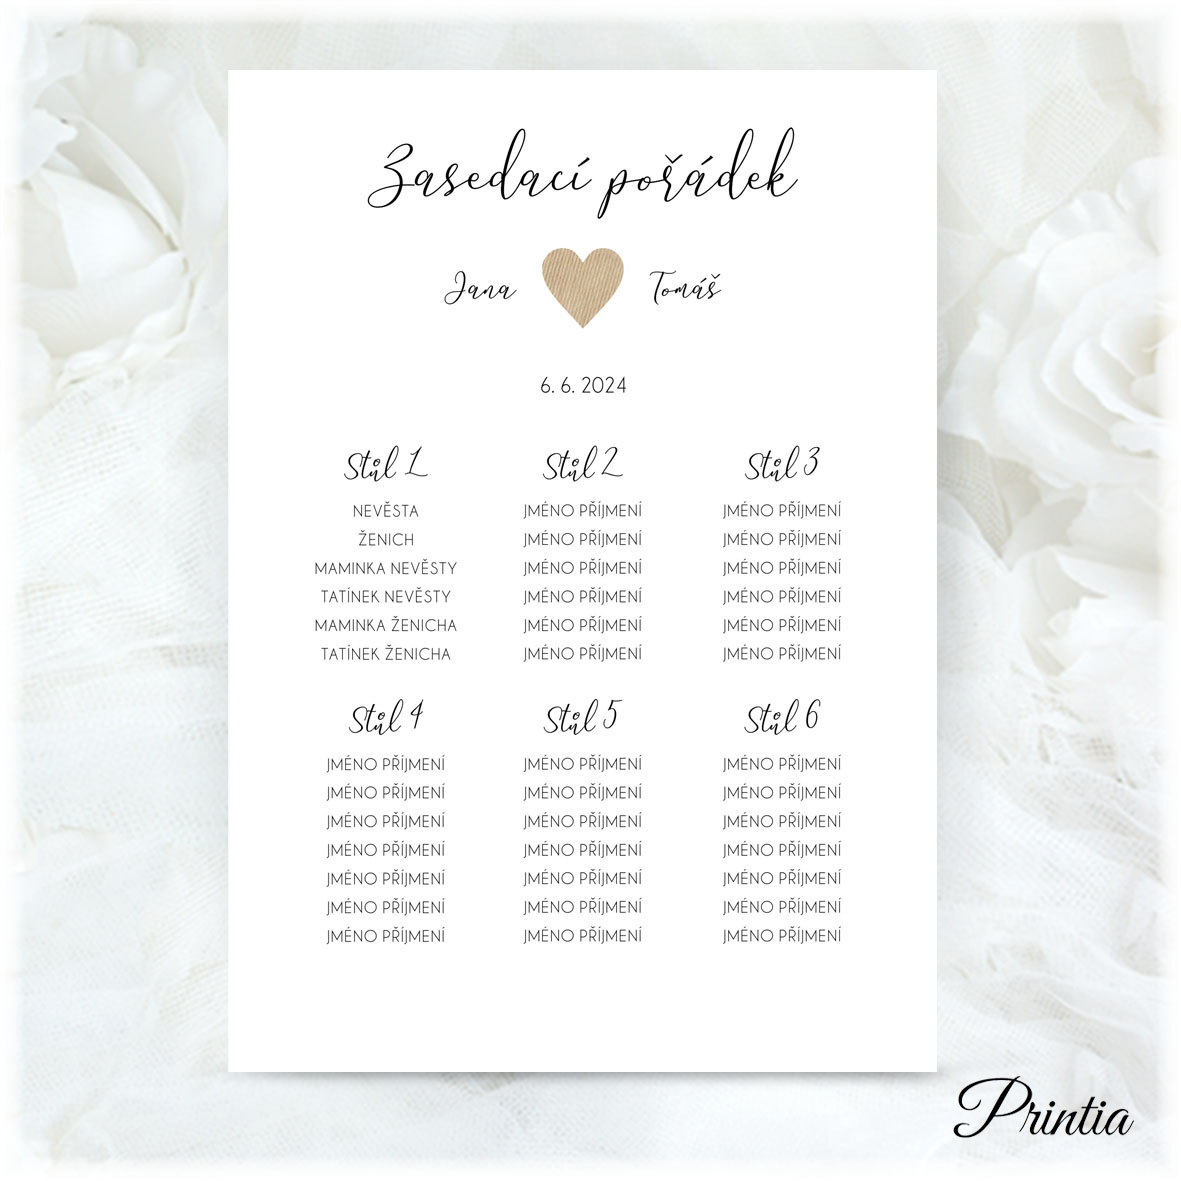 Wedding seating chart with glued kraft paper heart